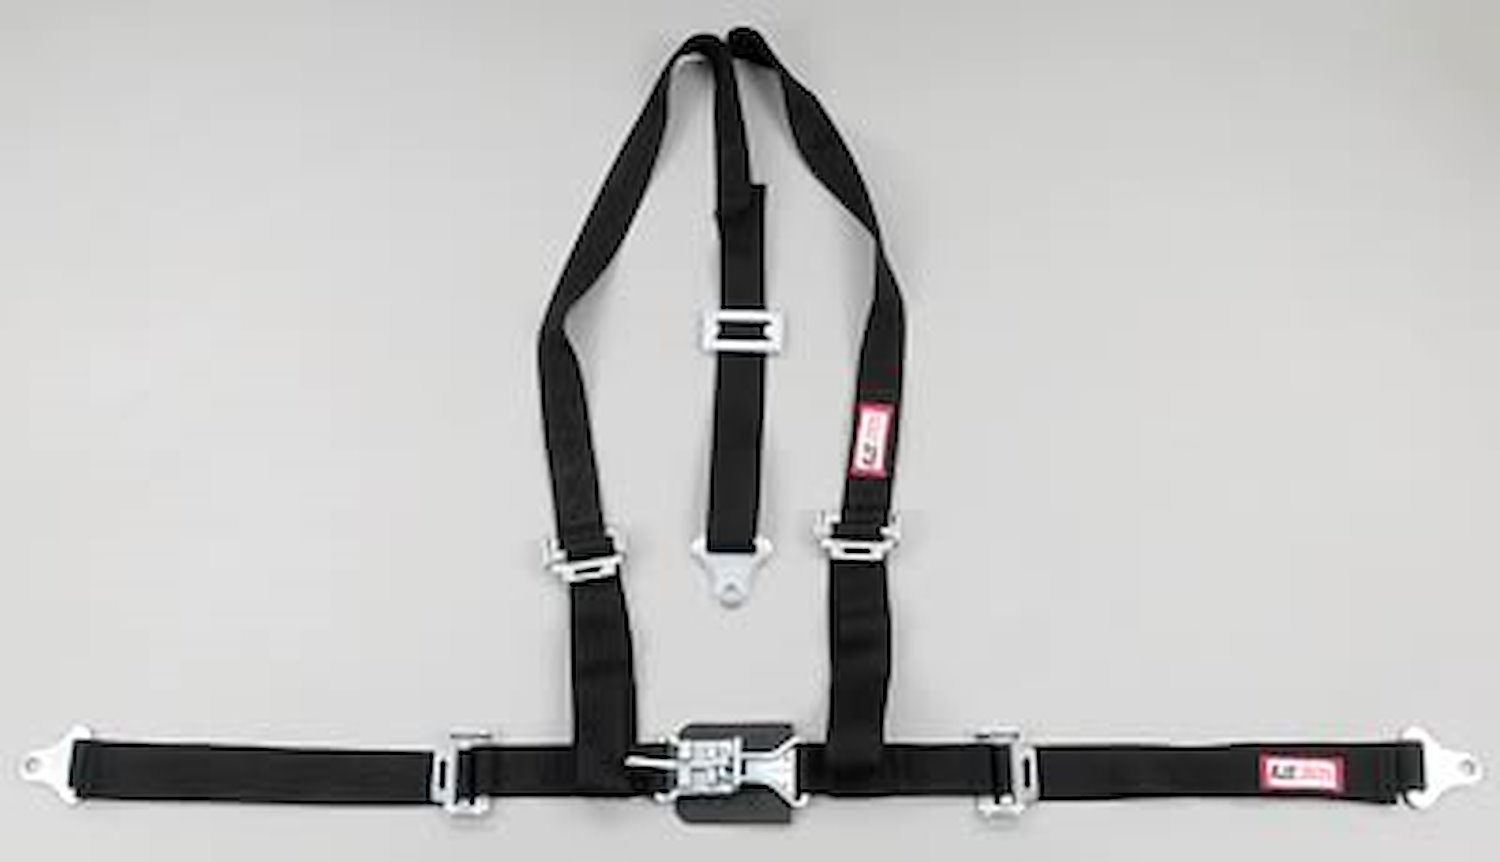 NON-SFI L&L HARNESS 2 PULL UP Lap Belt SNAP SEWN IN 2 S.H. Y FLOOR Mount w/STERNUM STRAP WRAP/BOLT YELLOW